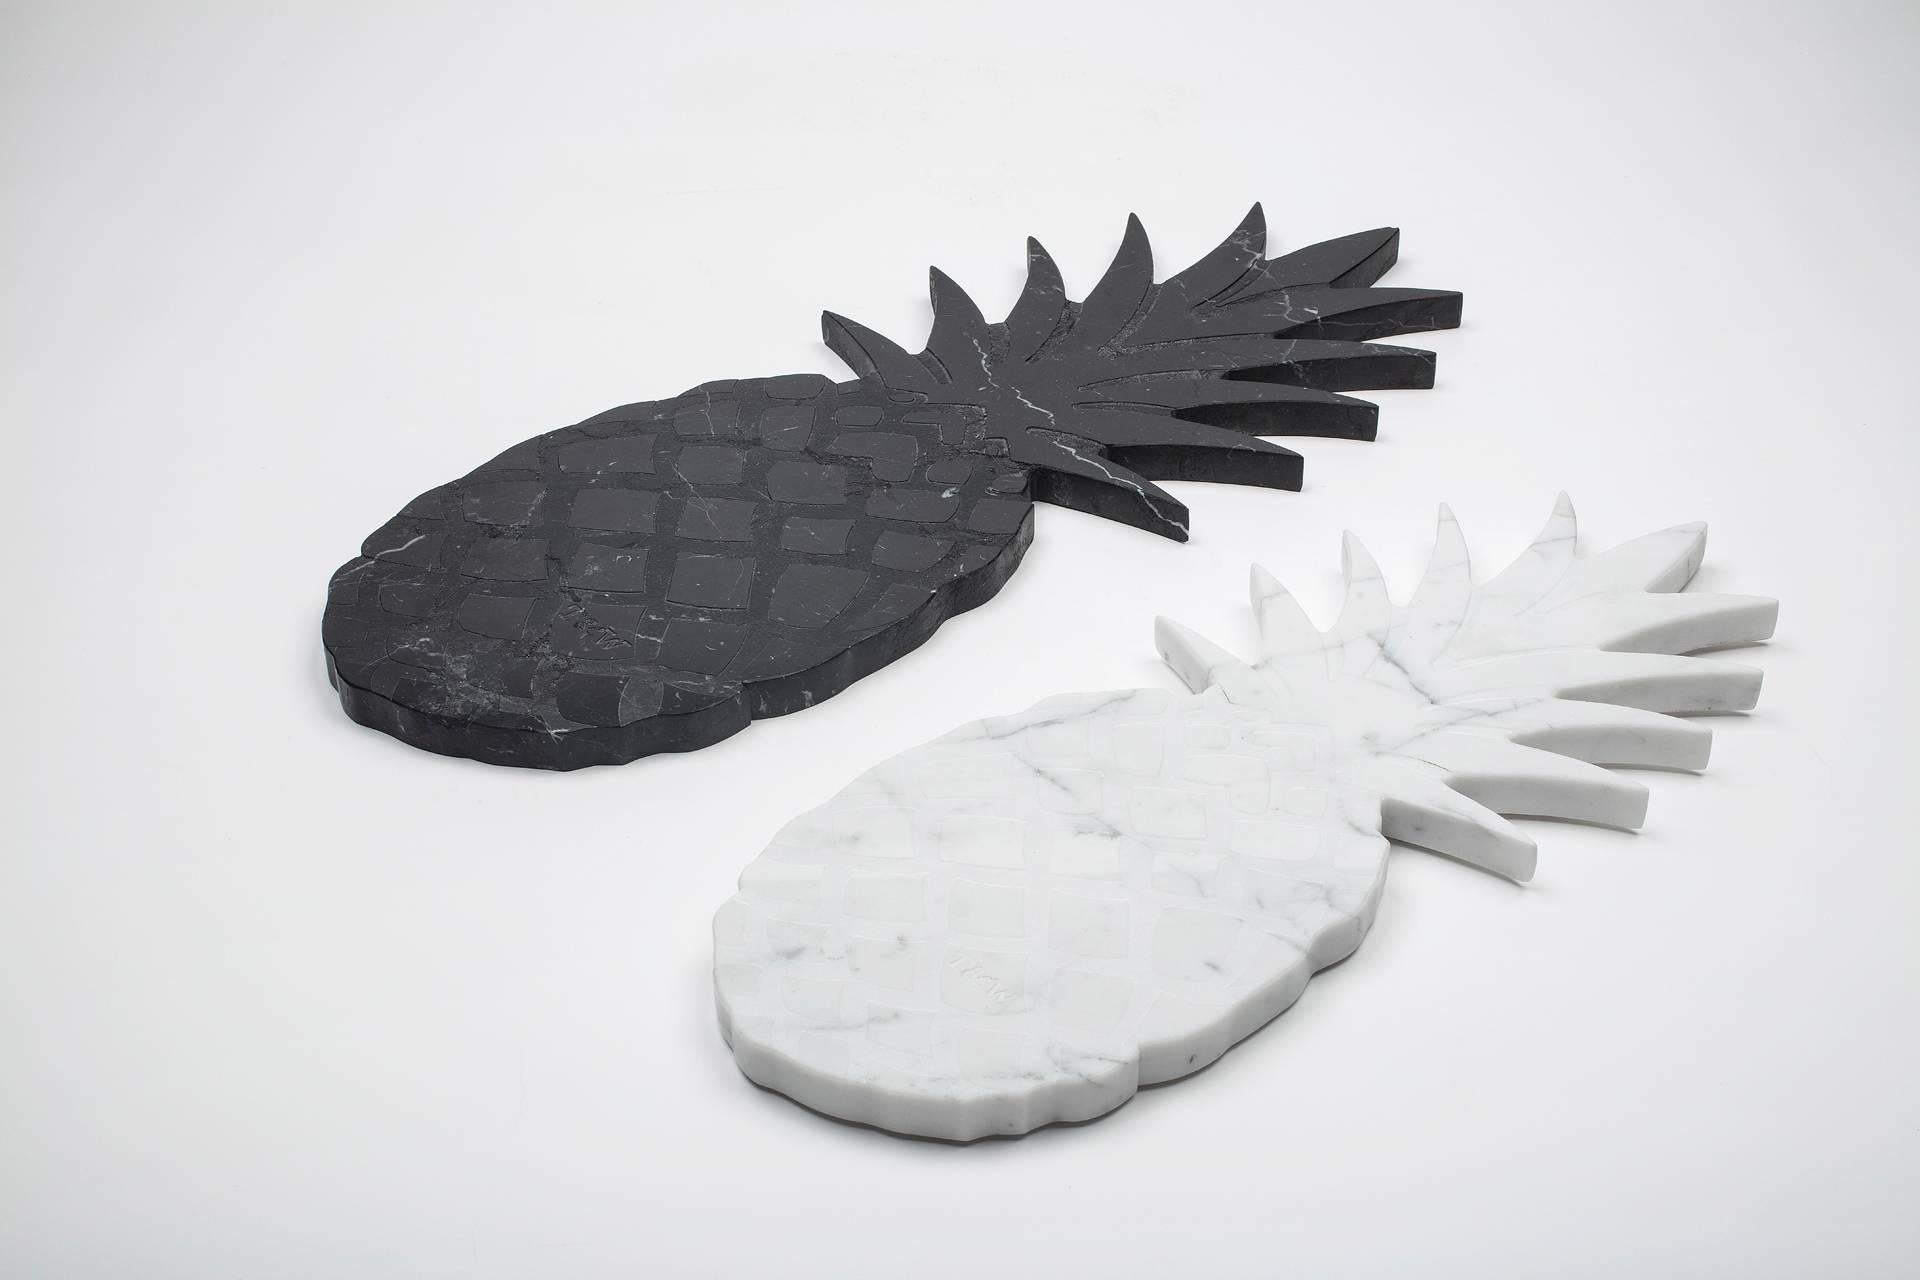 Medium size black marble cutting board and serving tray with pineapple shape. Each piece is in a way unique (every marble block is different in veins and shades) and handmade by Italian artisans specialized over generations in processing marble.